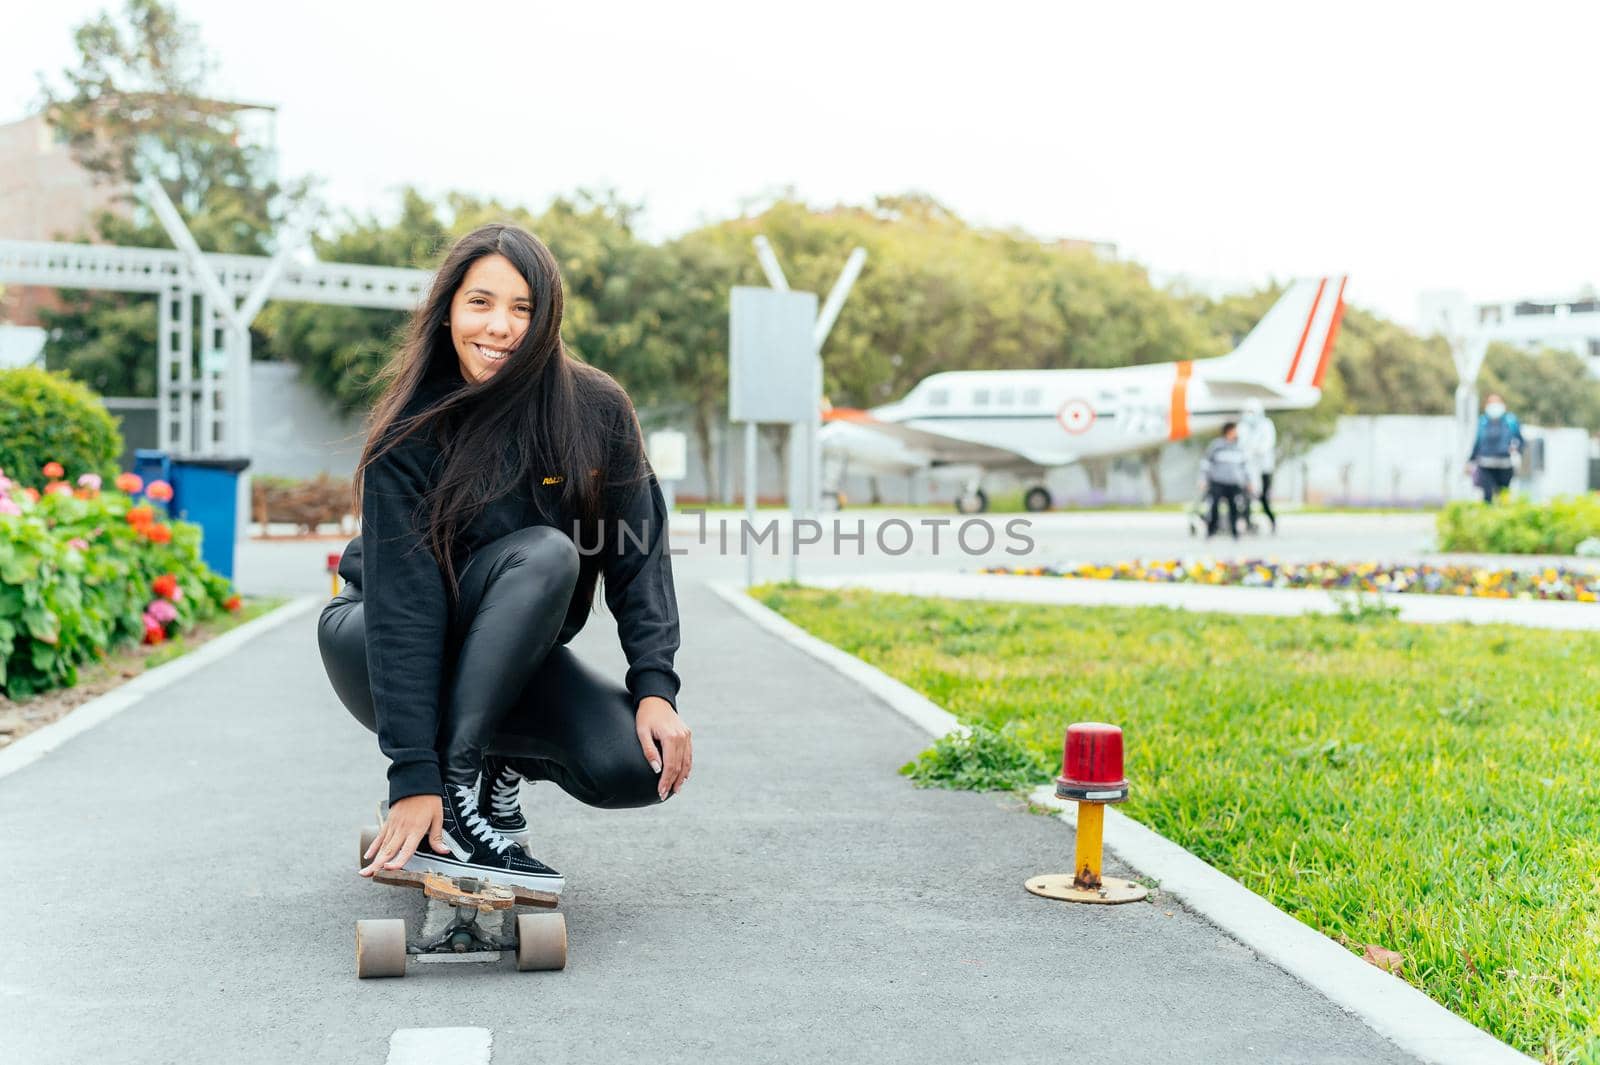 Young girl on longboard smiling. Outdoors, lifestyle